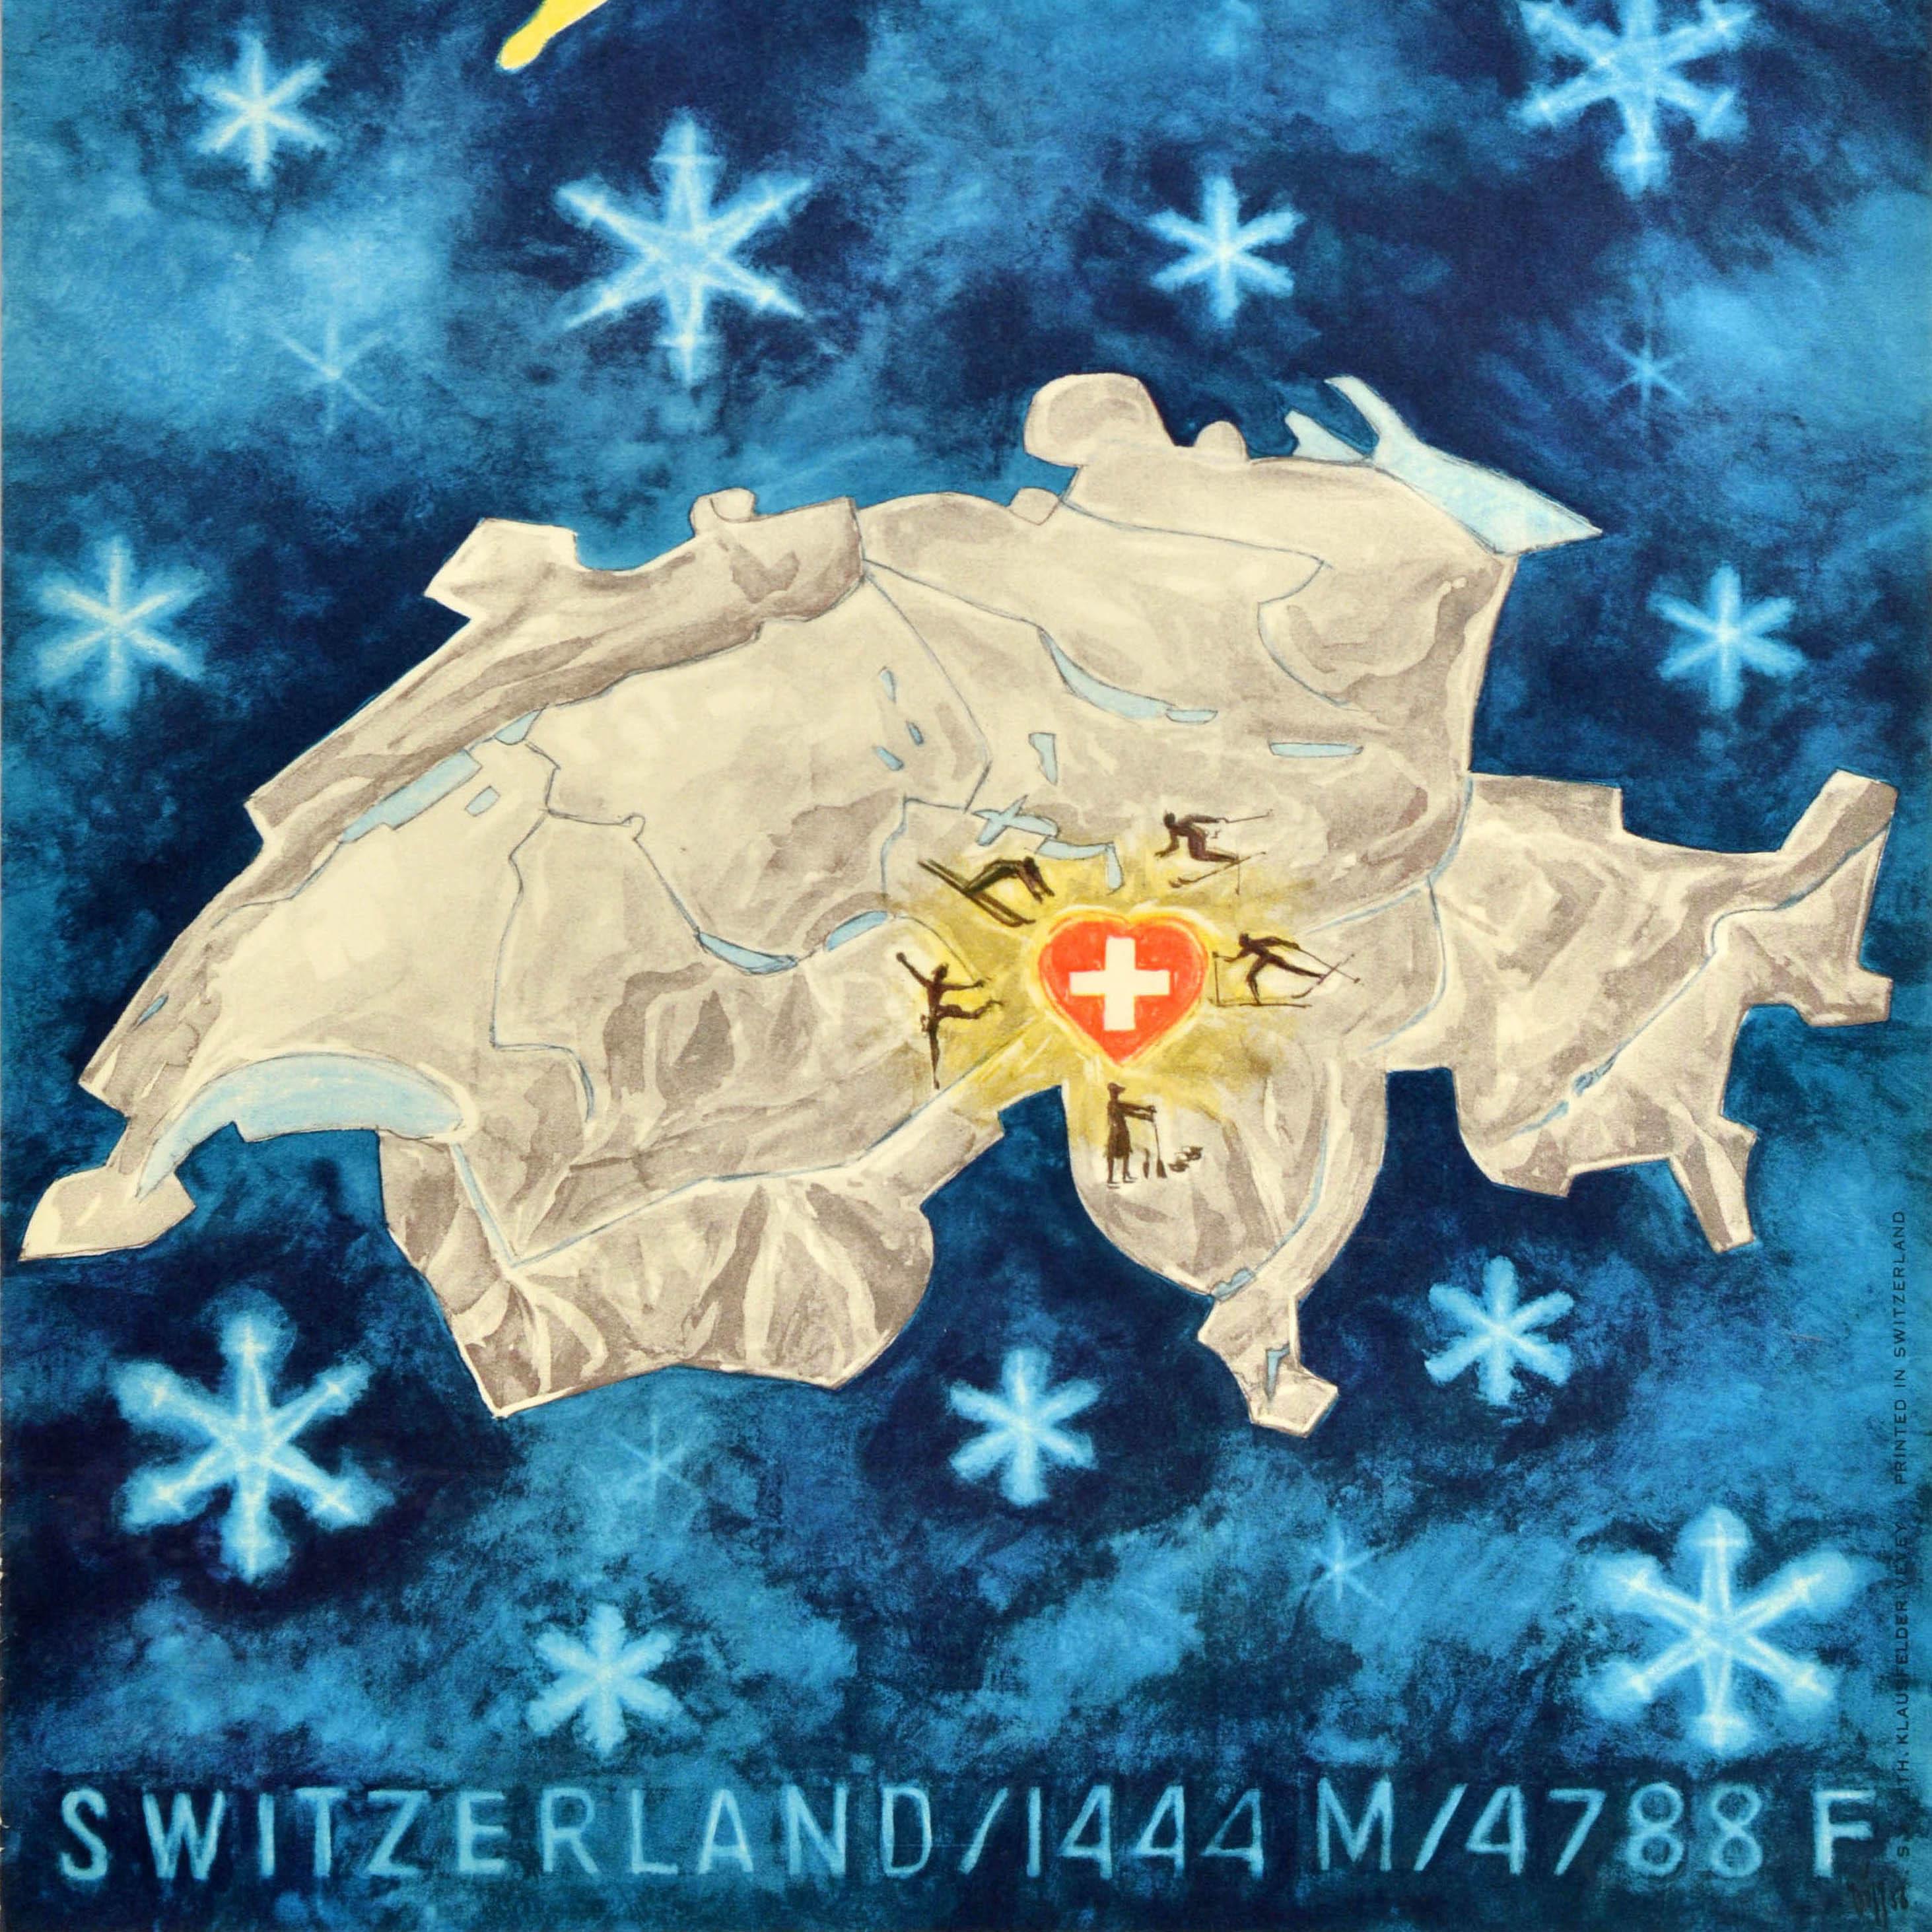 Original vintage winter sports travel poster for Andermatt in the Gotthard region of the Swiss Alps featuring a great graphic design outline of a map of Switzerland with a Swiss flag in the shape of a heart marking the location of the ancient